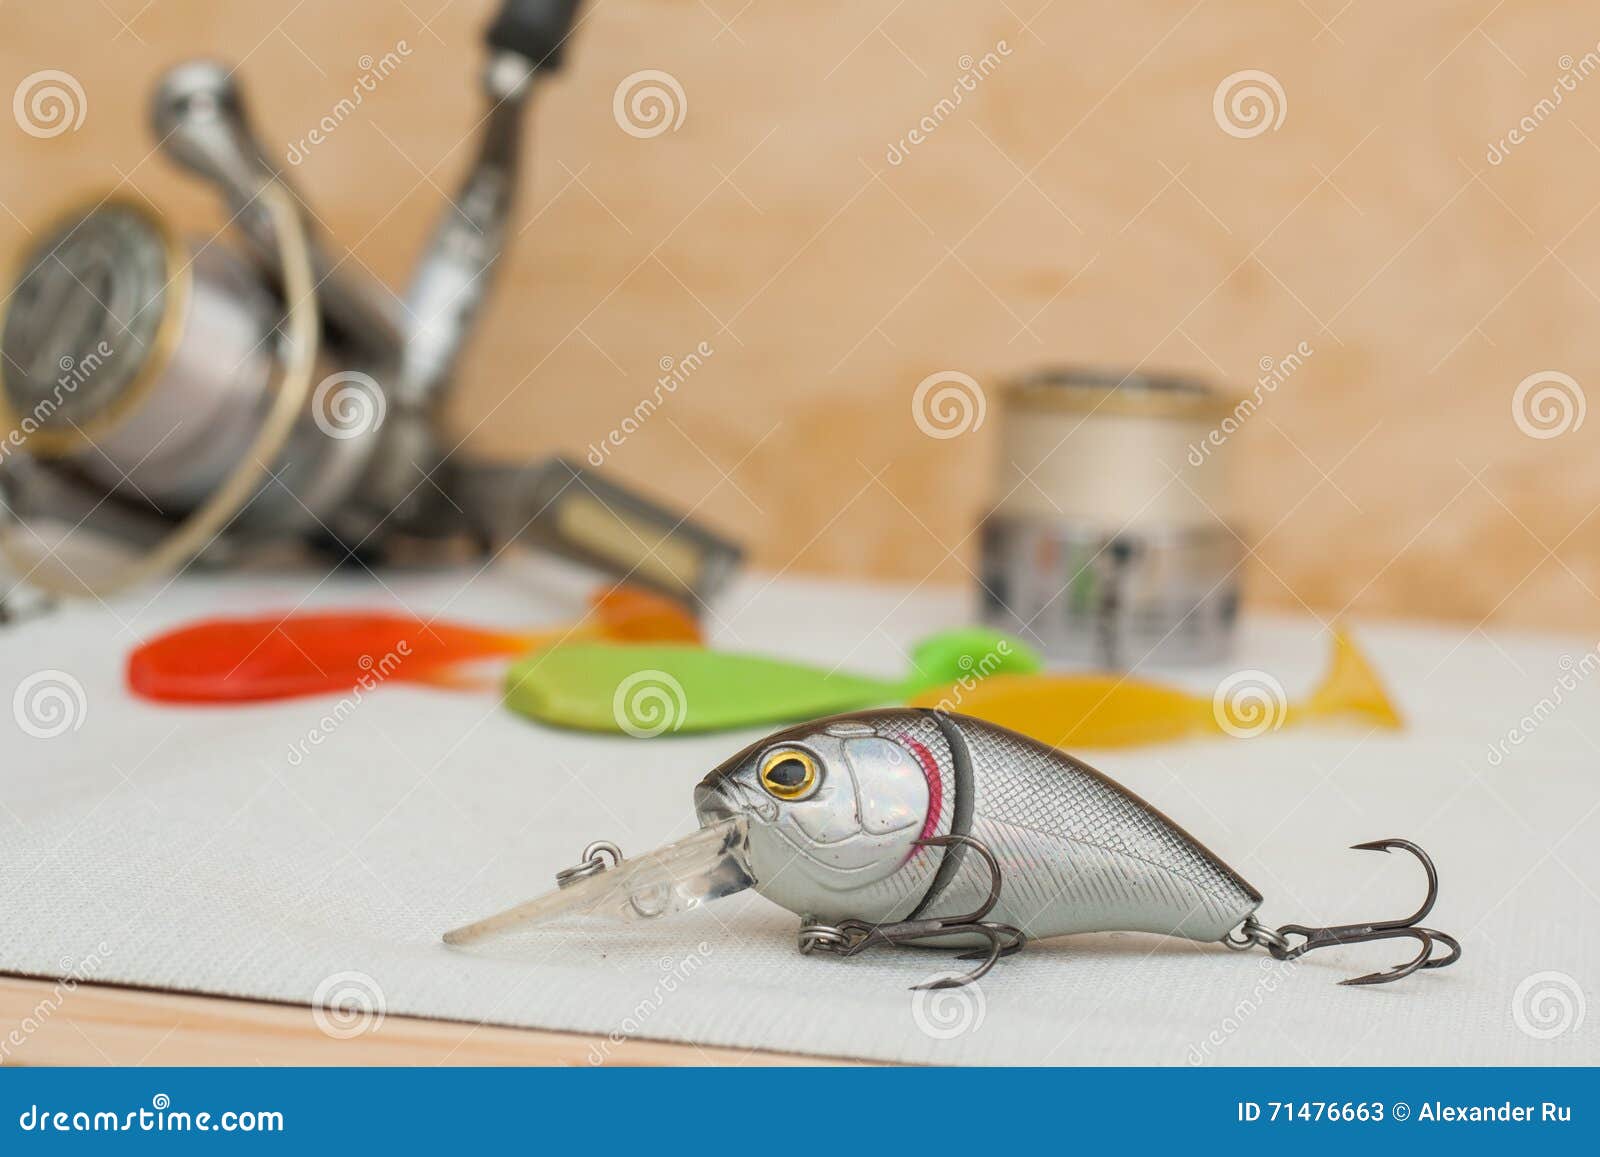 https://thumbs.dreamstime.com/z/bipartite-lure-lies-white-cloth-background-inertialess-coil-rubber-lures-different-colors-71476663.jpg